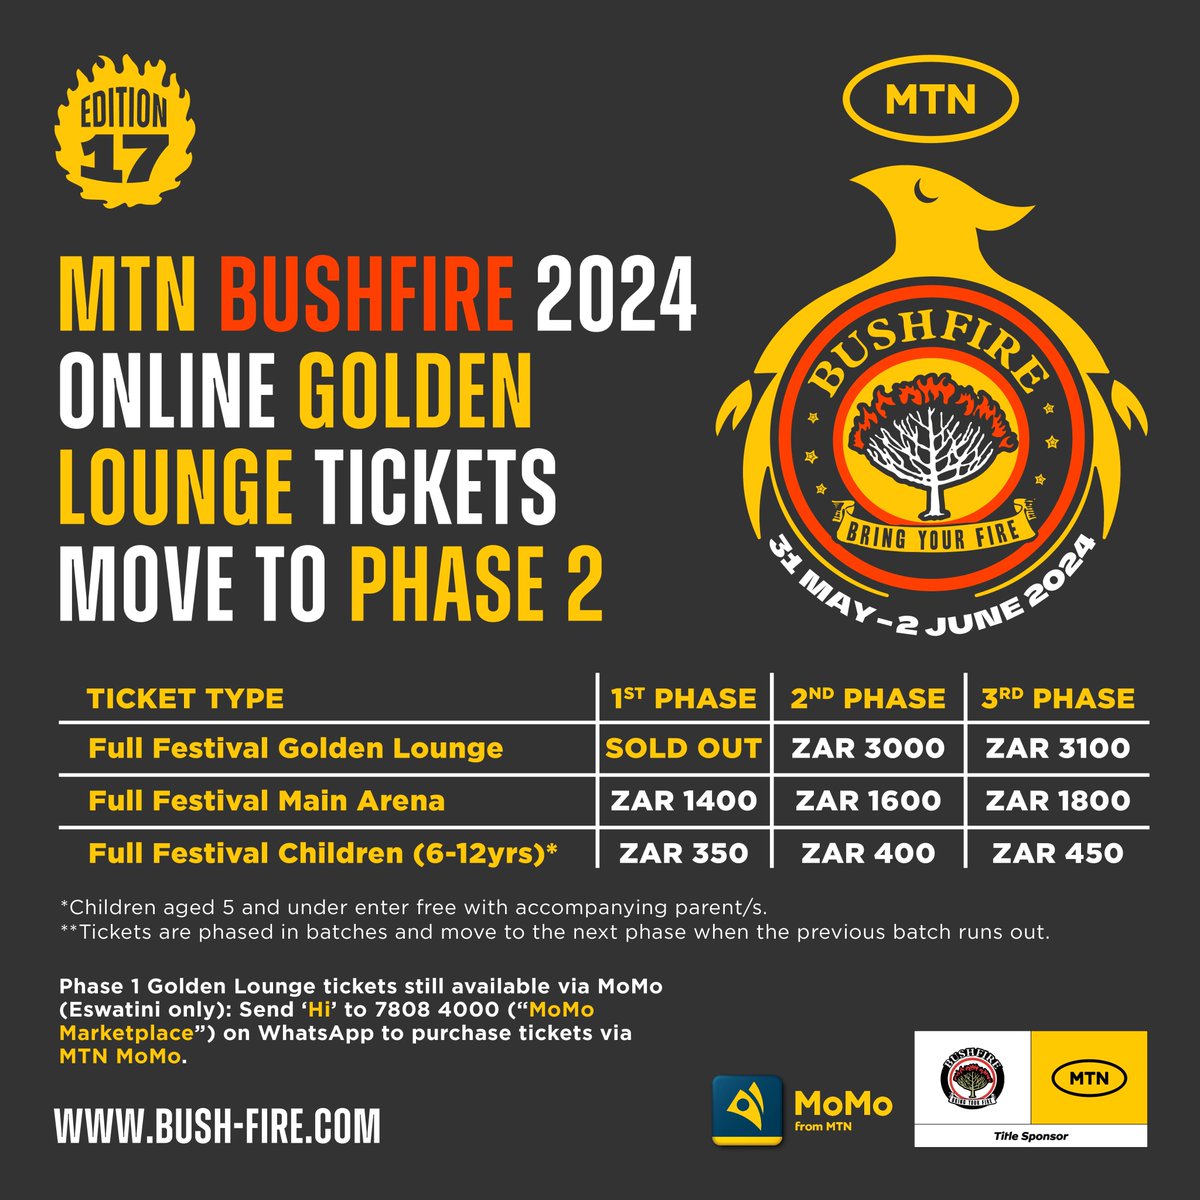 Online Golden Lounge tickets move to Phase 2! Get yours via bush-fire.com/tickets/ Phase 1 Golden Lounge tickets are still available for Eswatini Firestarters only, via MTN MoMo. Send 'Hi' to 7808 4000 (MoMo Marketplace) via WhatsApp and follow the prompts. #MTNBUSHFIRE2024